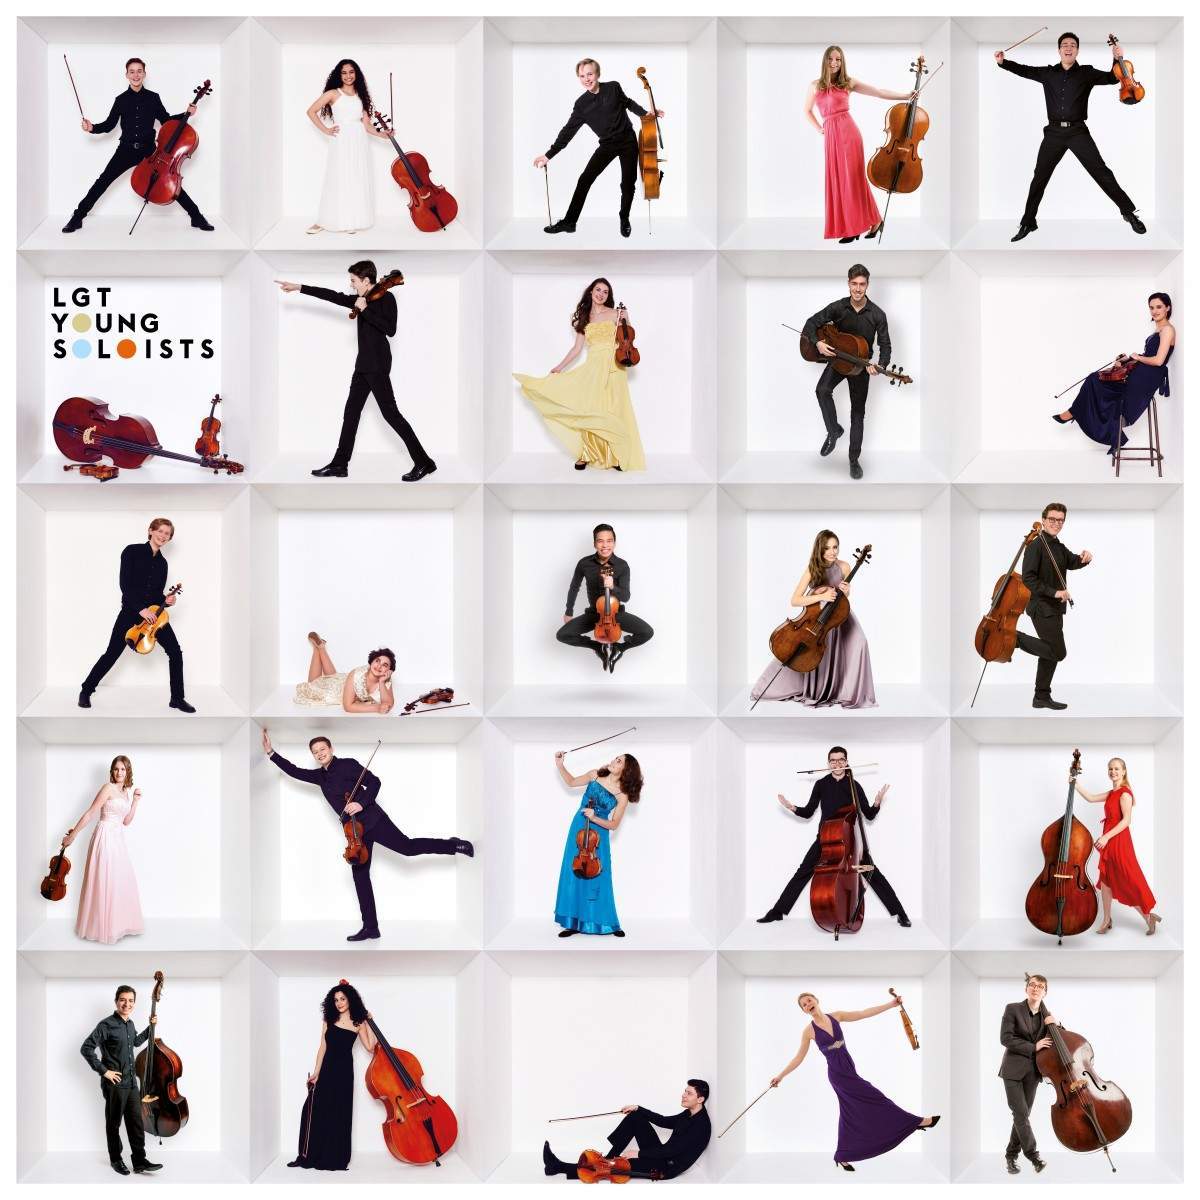 20200401_Young_Soloists_Square_%28002%29